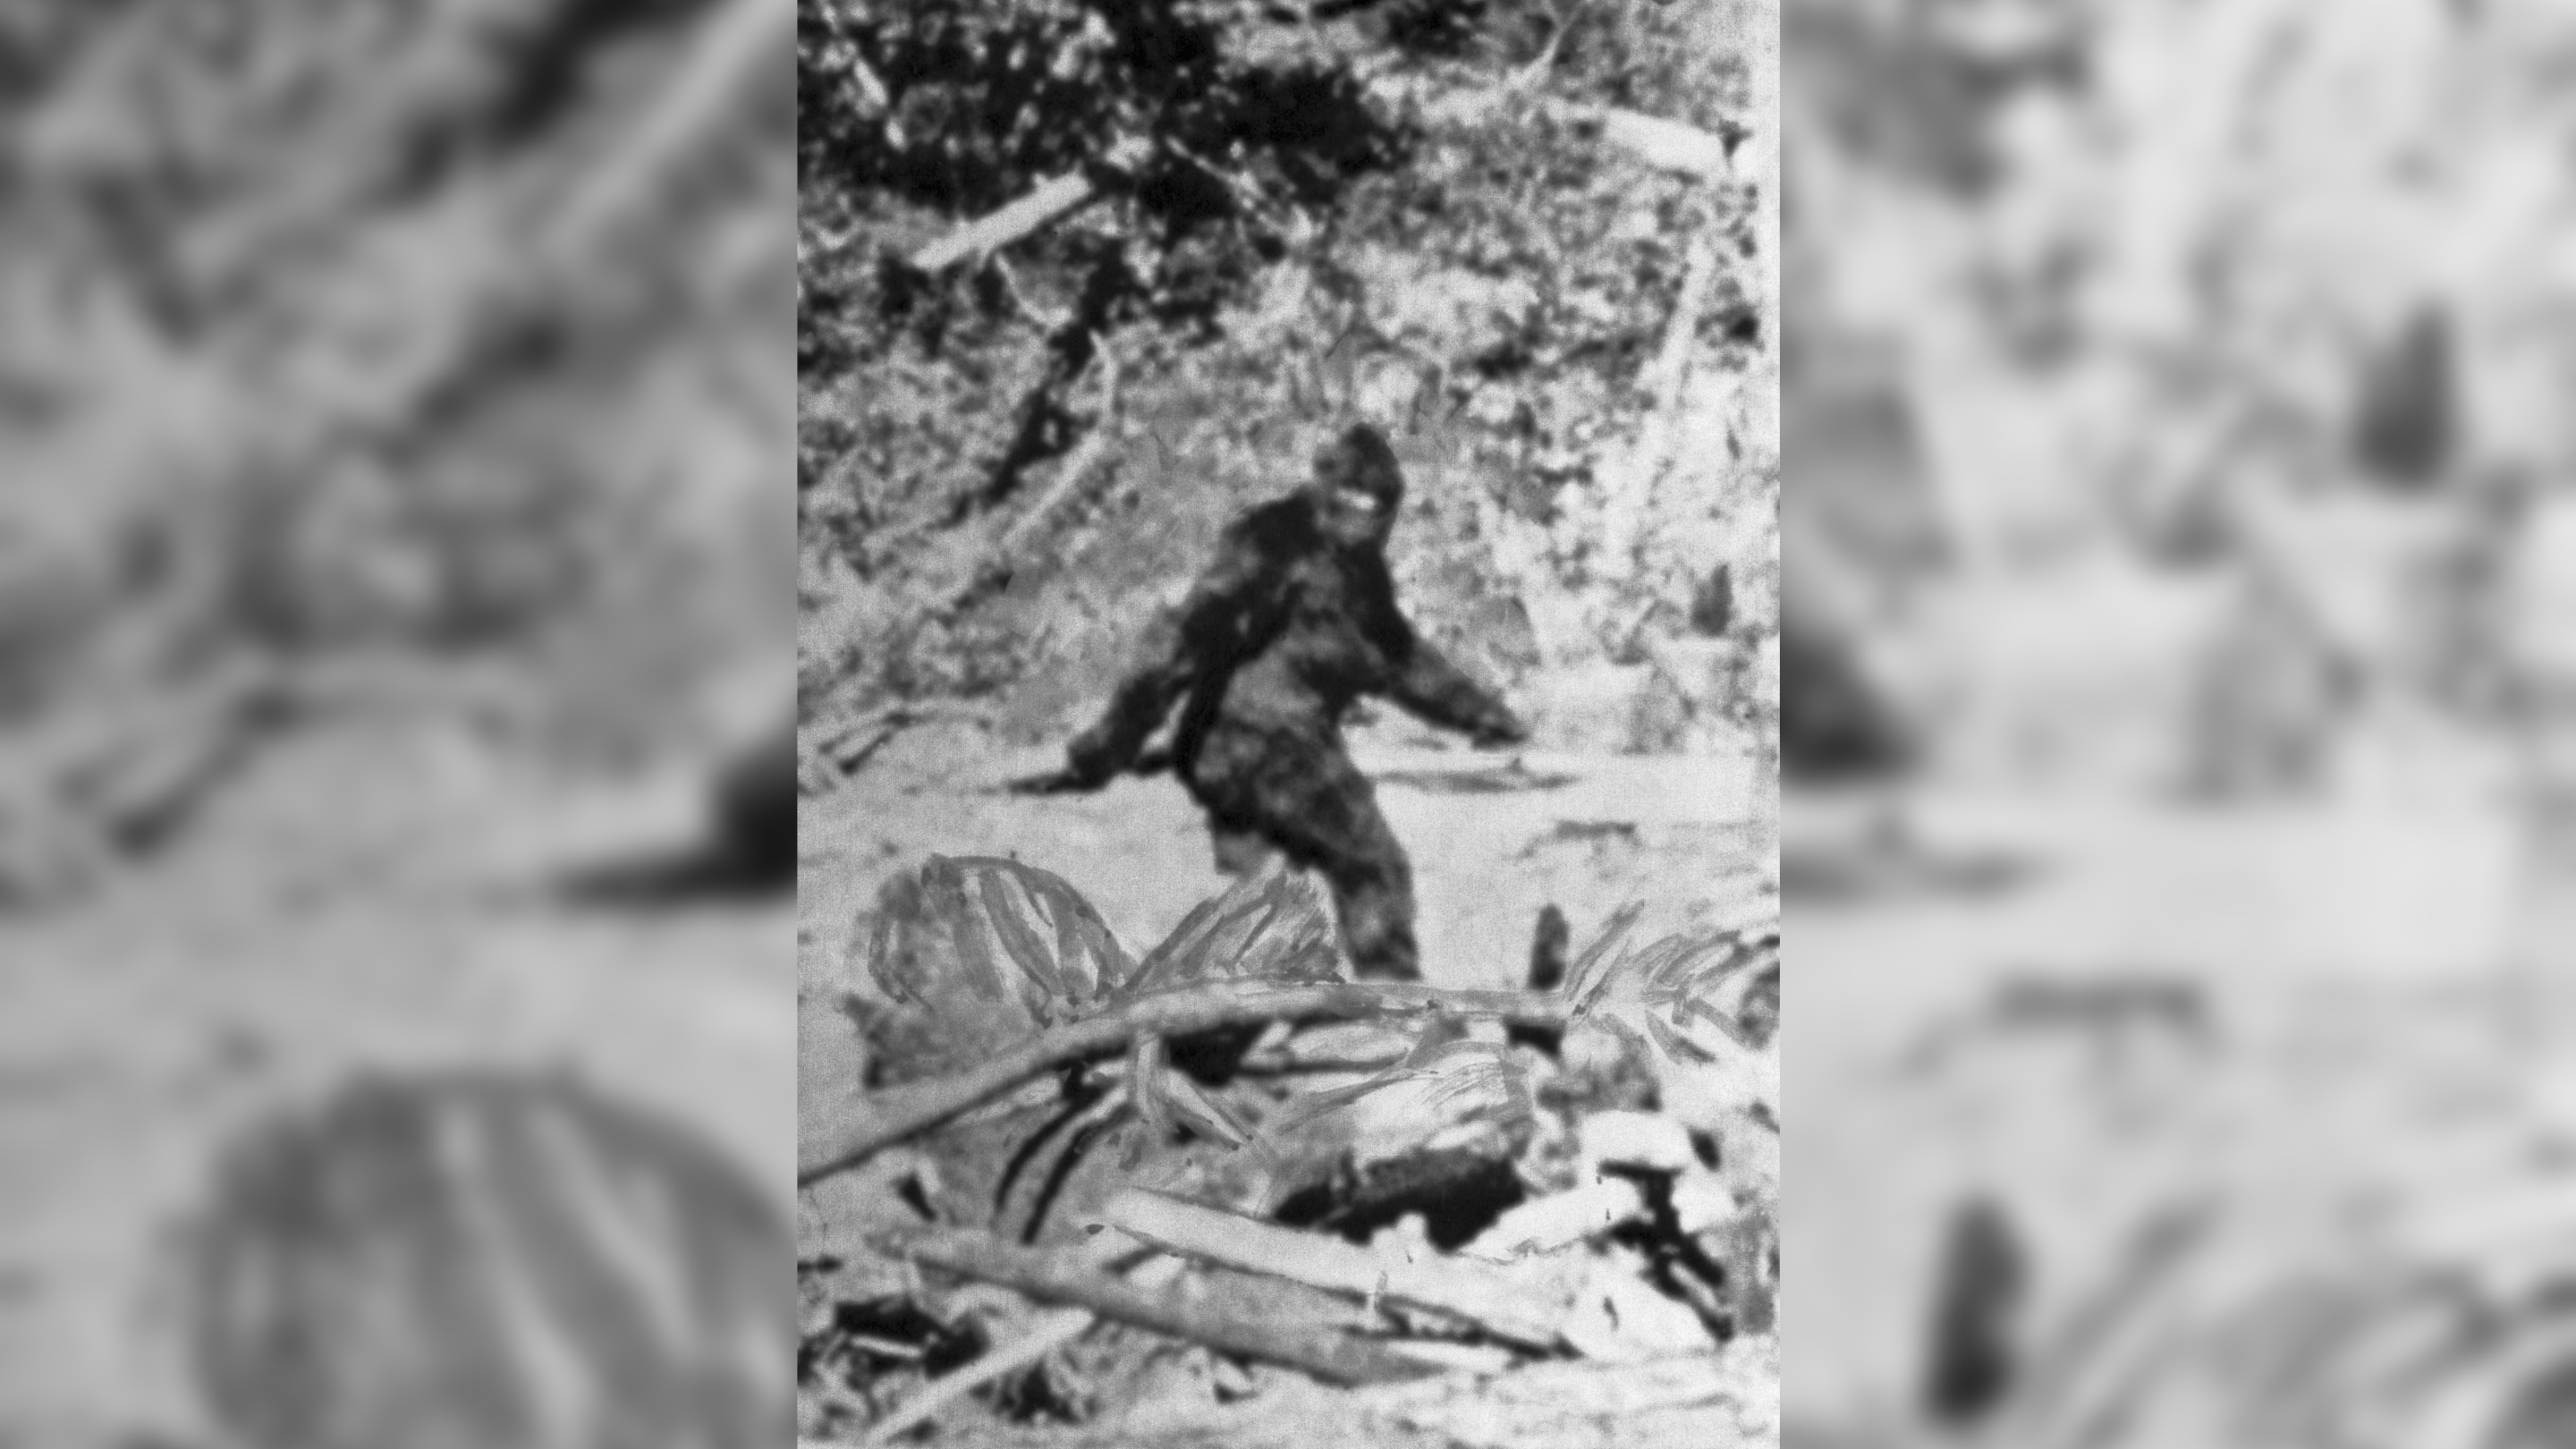 A still image alleged to be of Bigfoot taken northeast of Eureka, California in 1967.